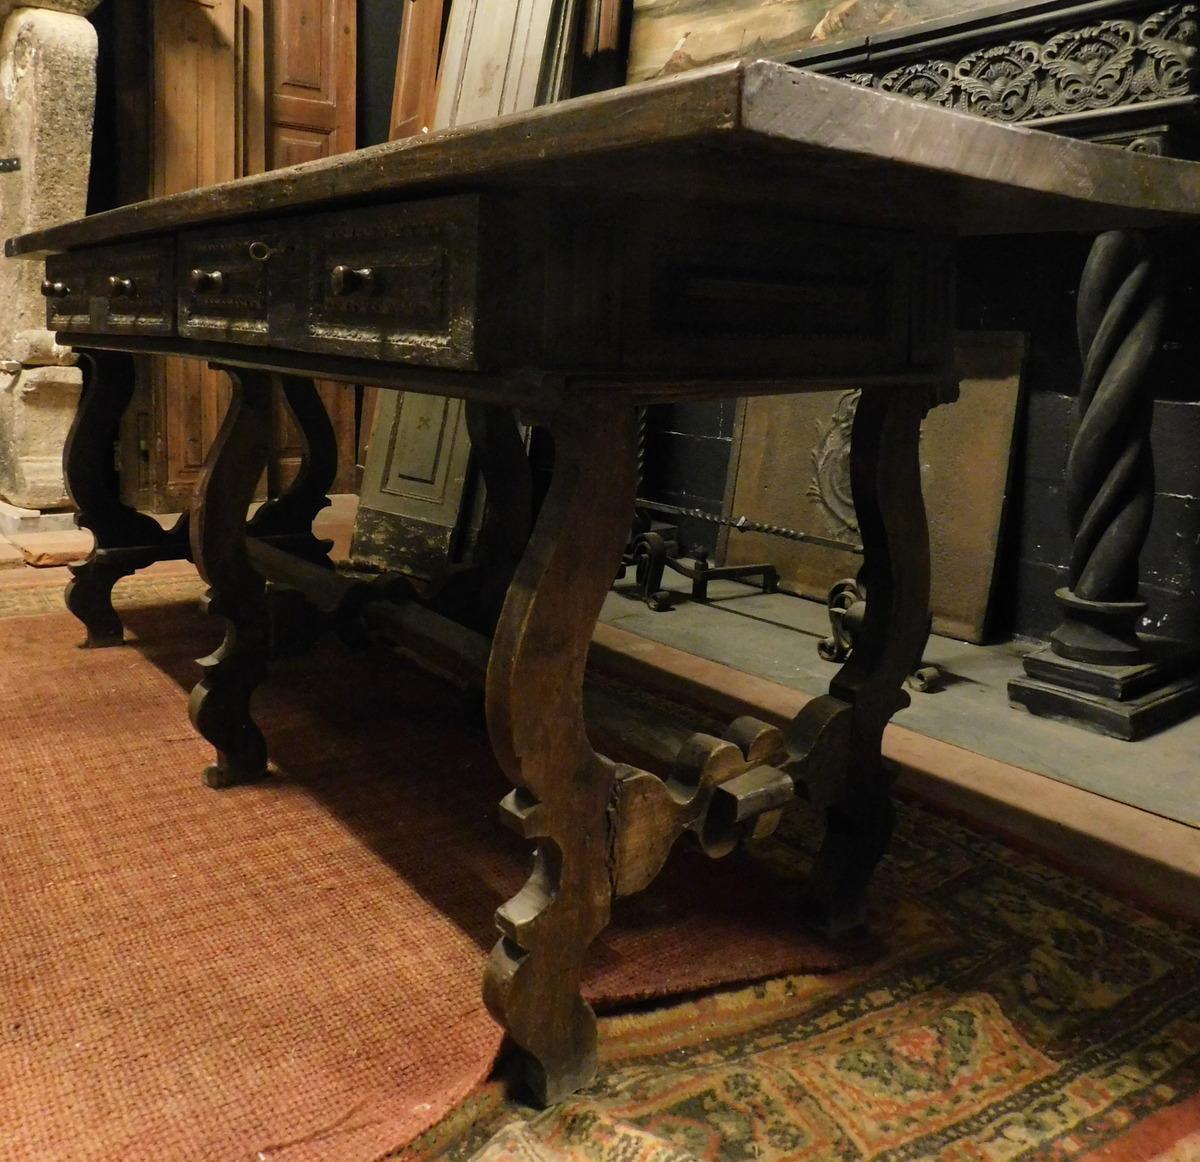 Antique Walnut Table with Drawers, Richly Carved, 18th Century Spain 2